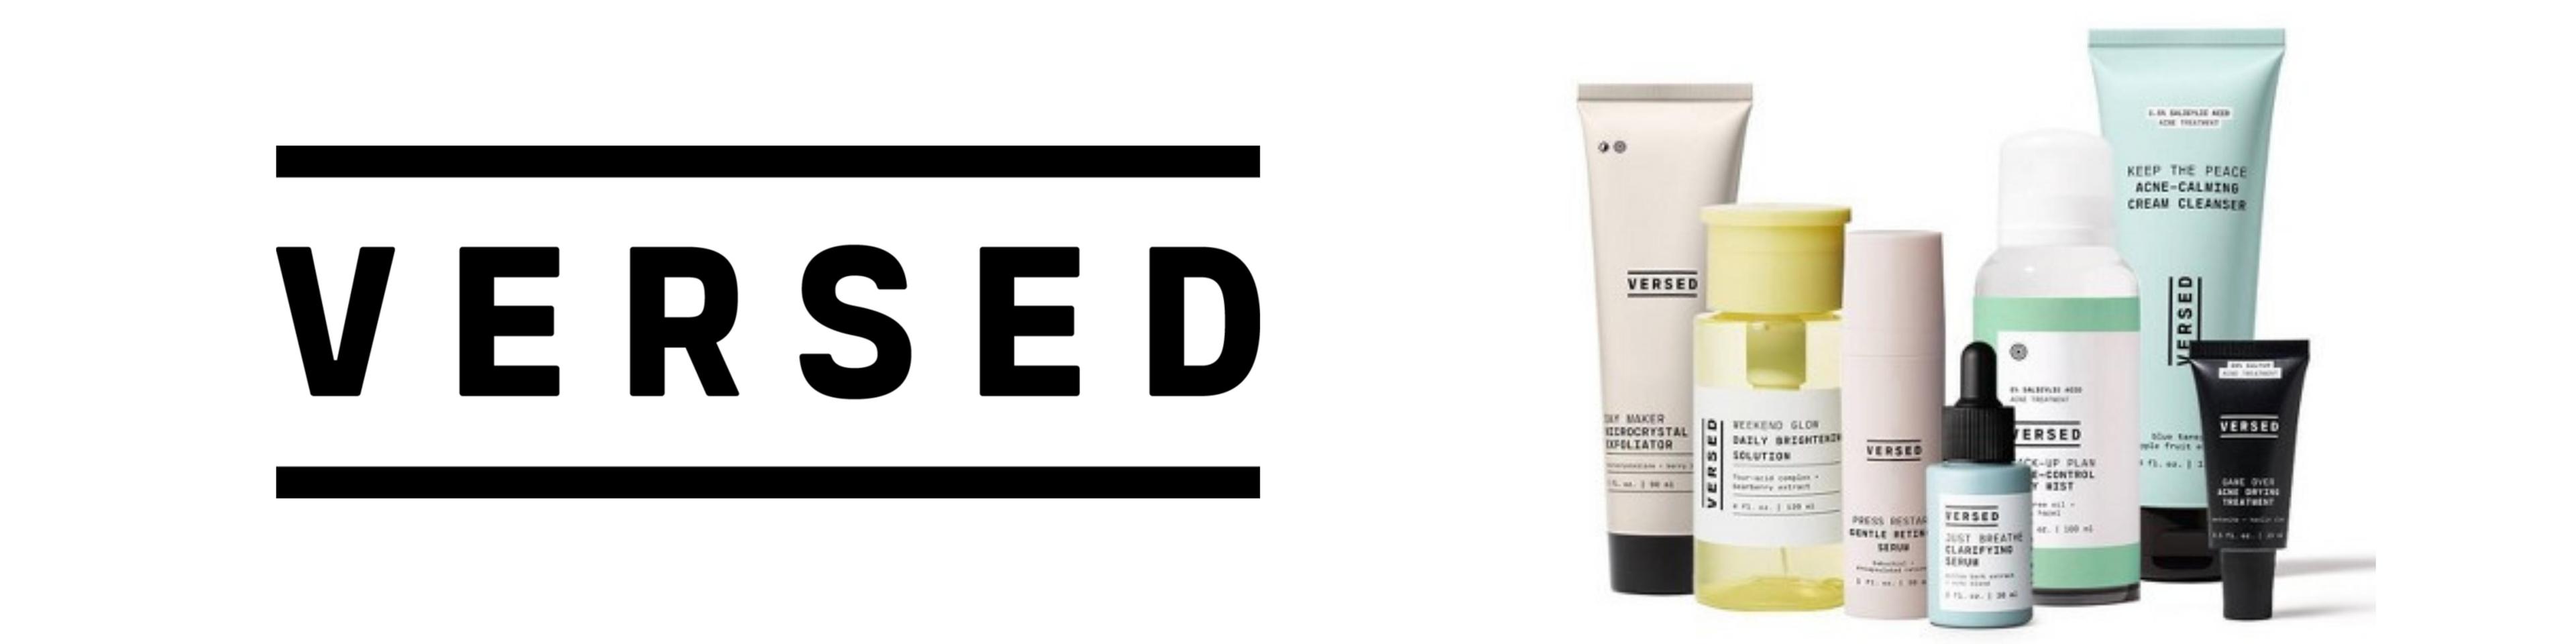 How Versed – A Top Selling Skincare Line at Target Leveraged Hundreds of Diverse Beauty Product Reviews to Increase Brand Awareness